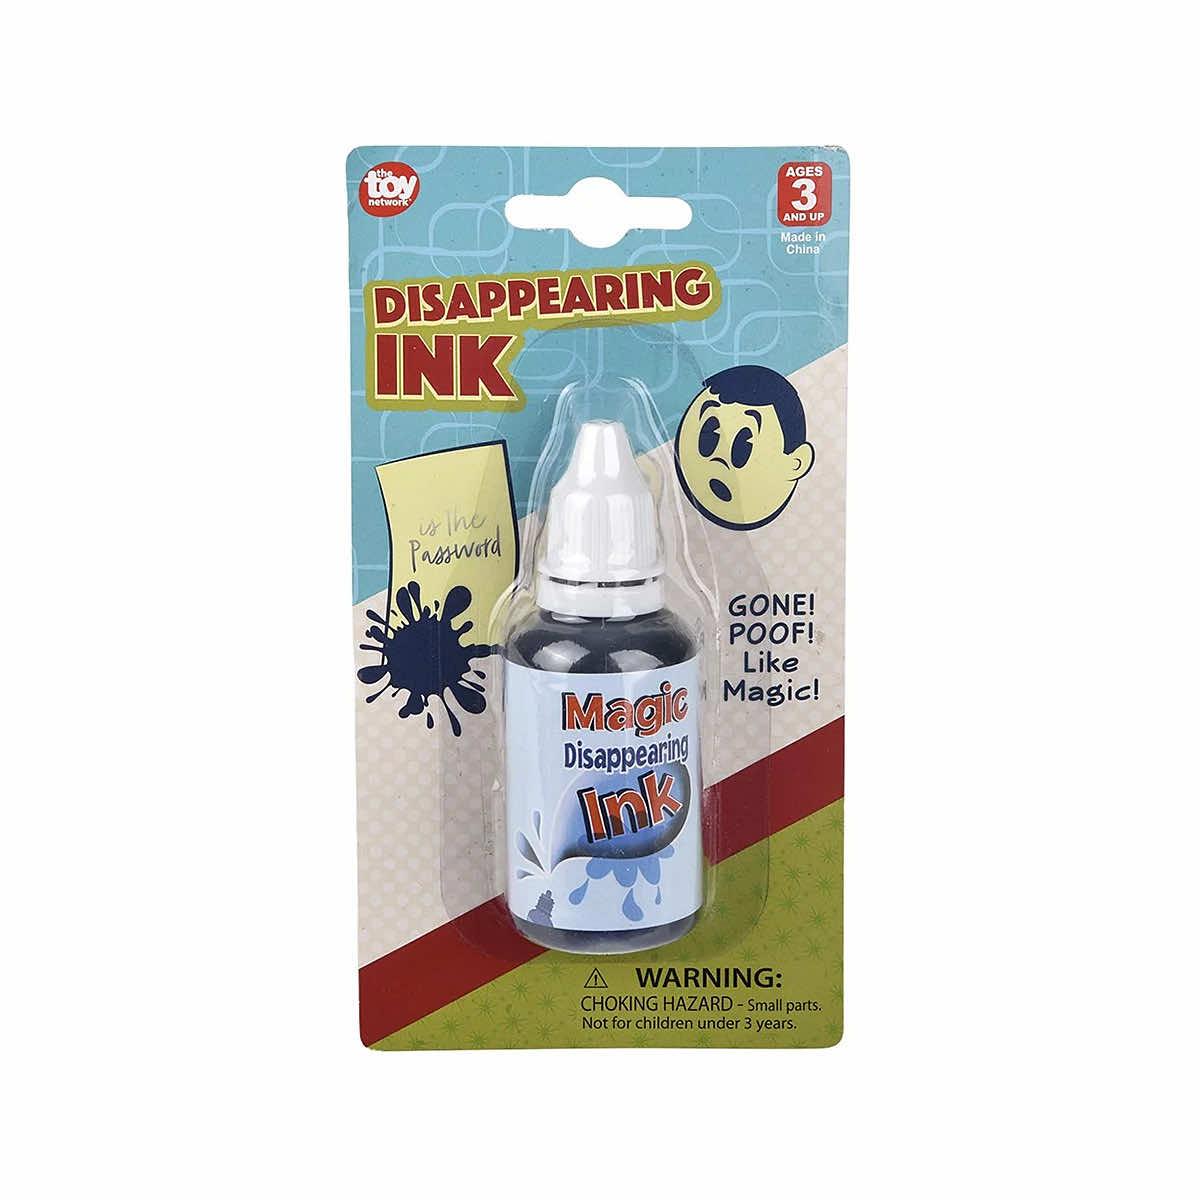 Disappearing Ink Trick Toy